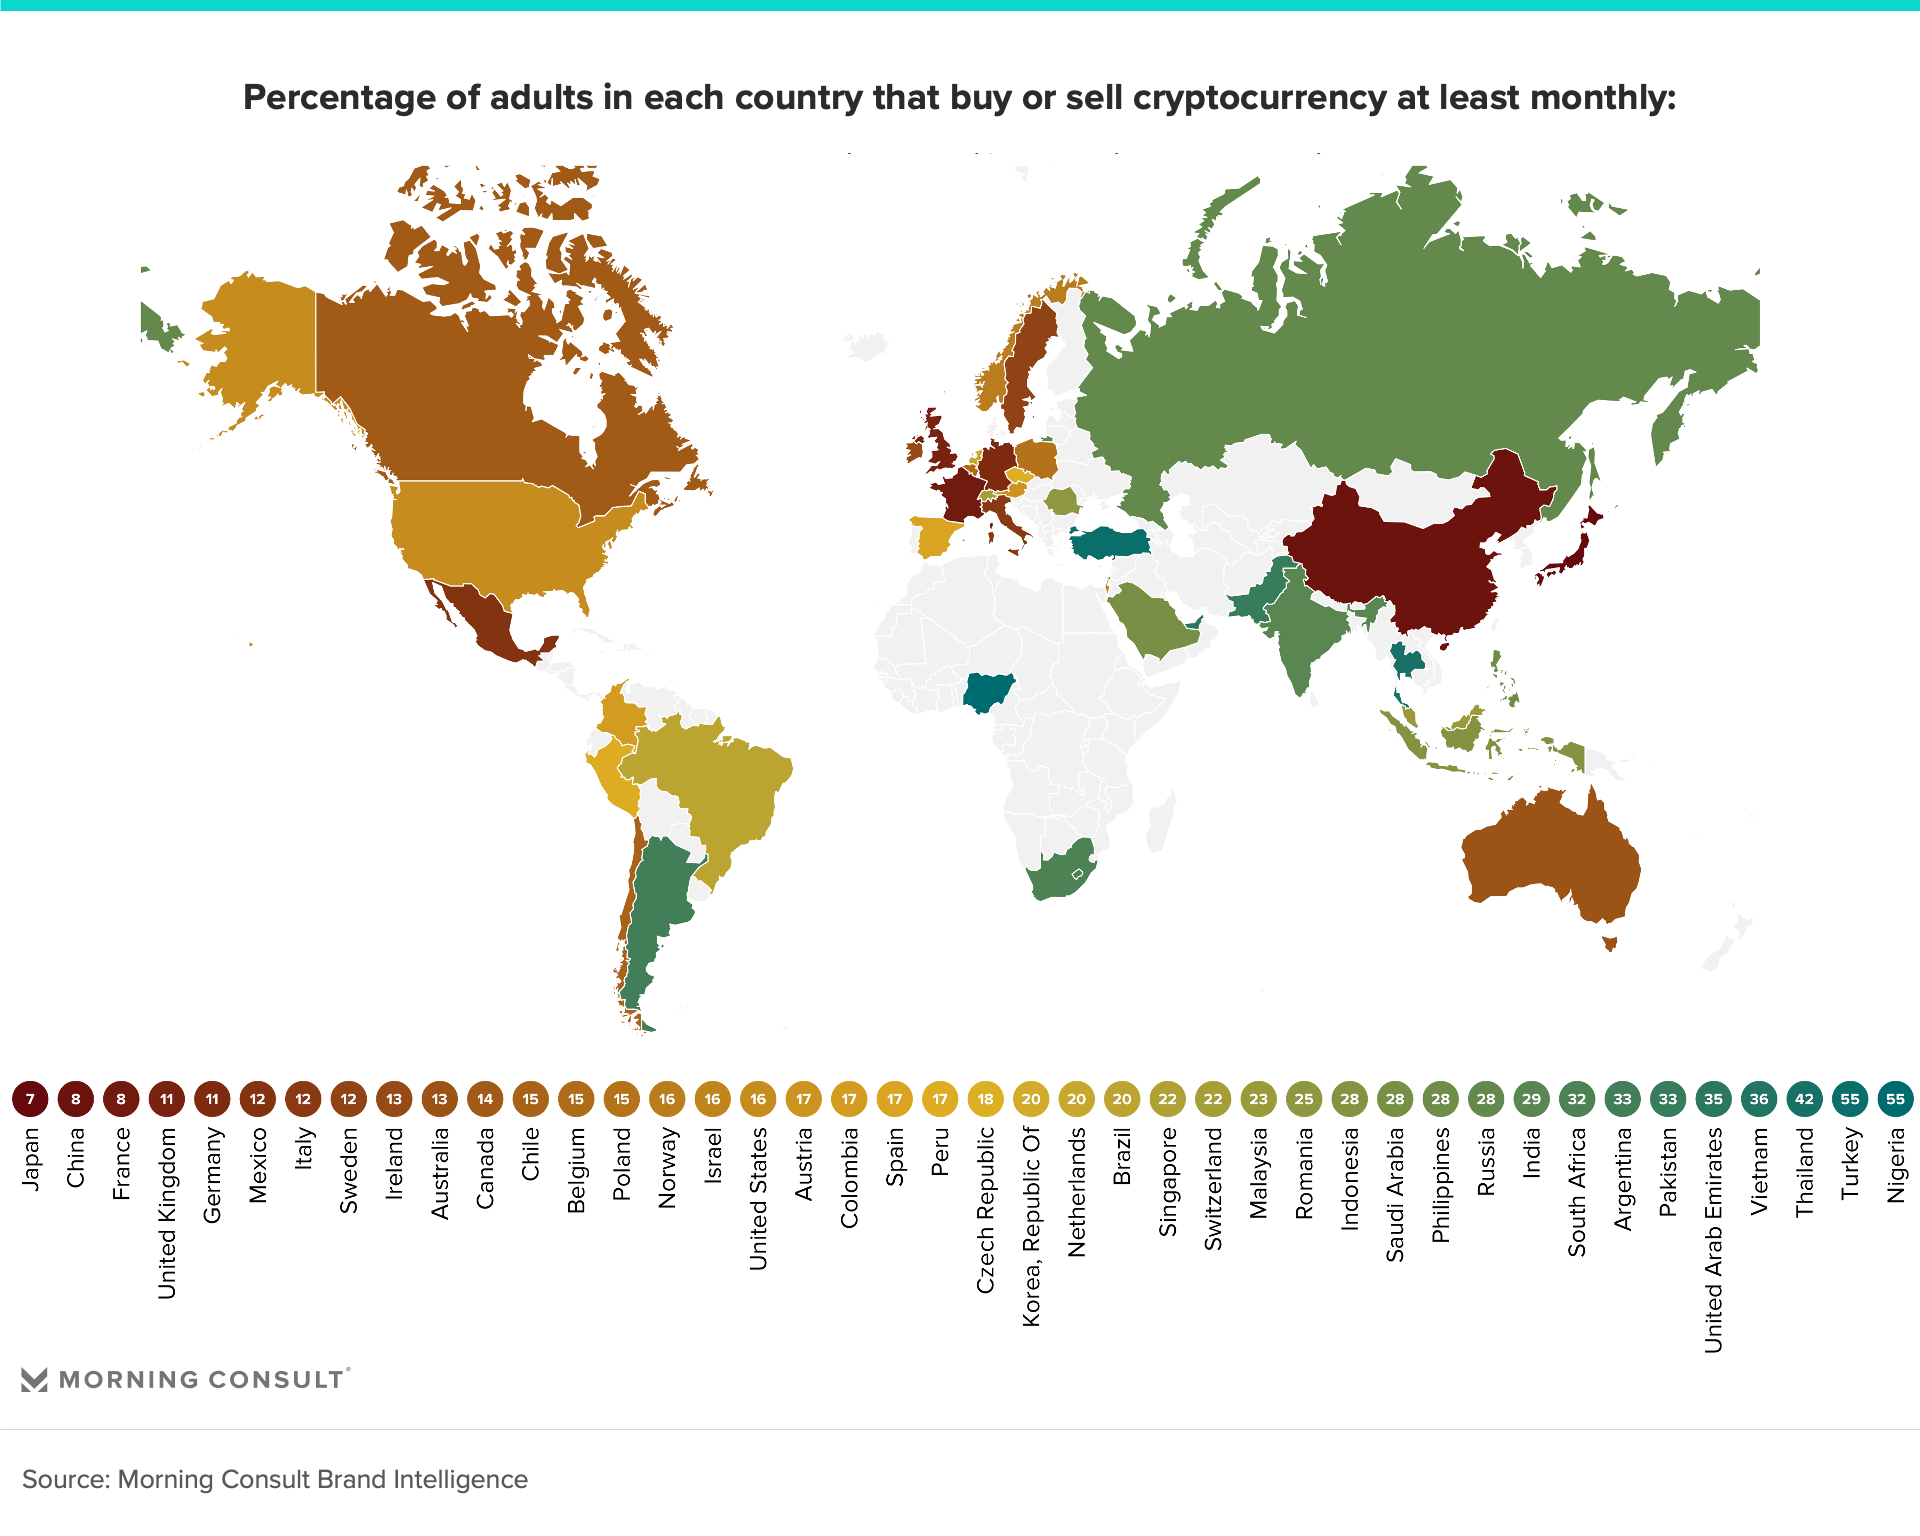 Map showing the percentage of adults in each country that buy or sell cryptocurrency